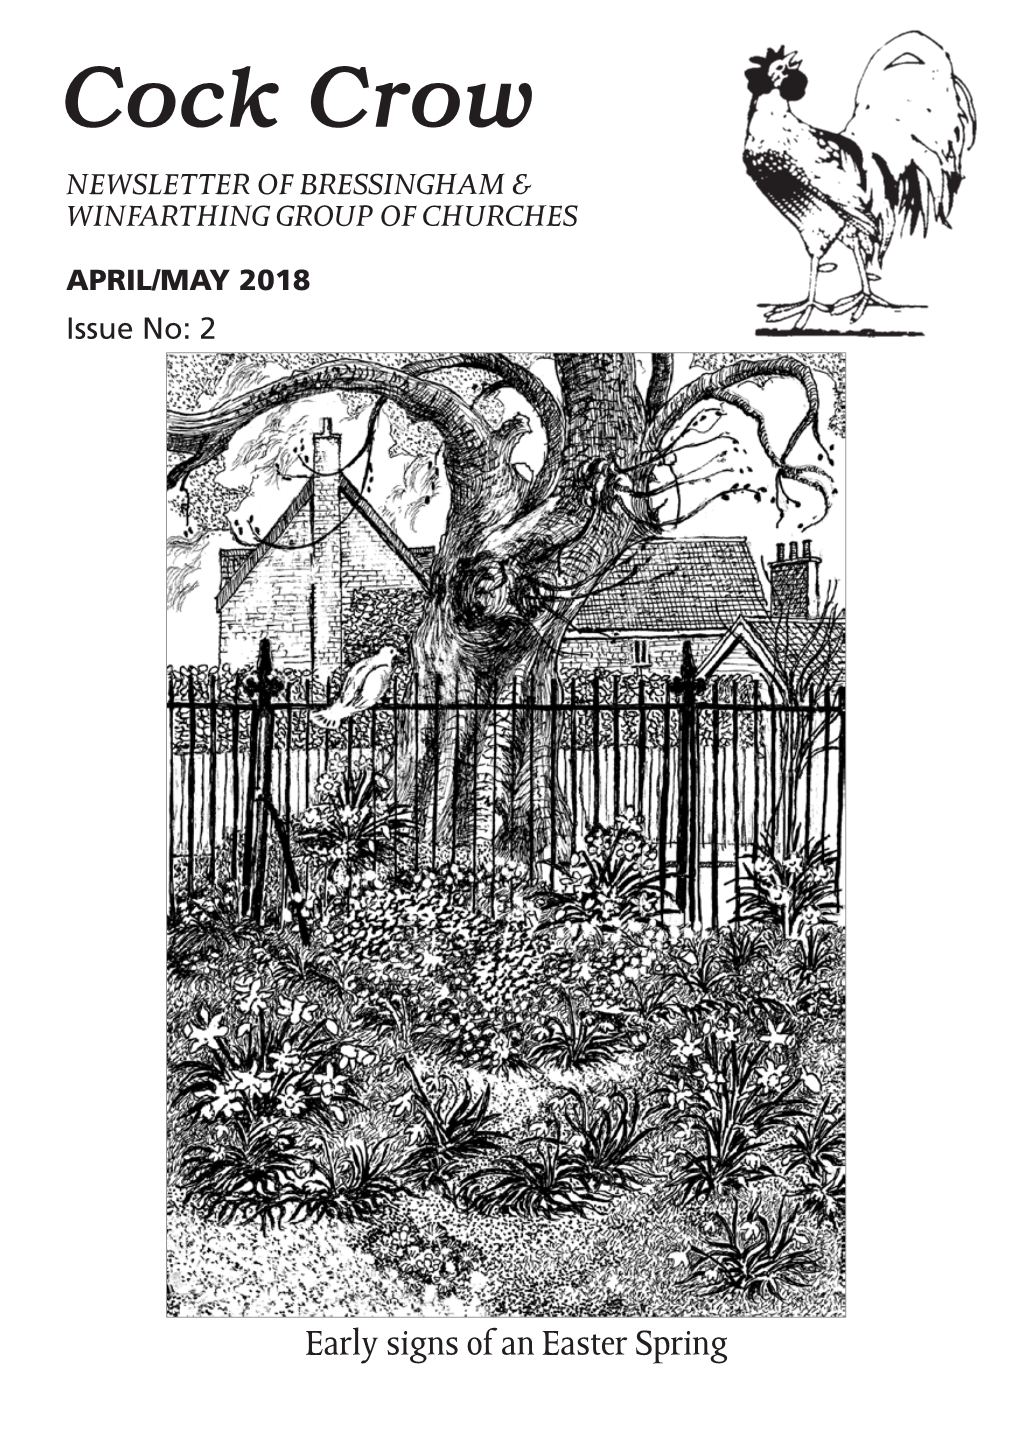 Cock Crow NEWSLETTER of BRESSINGHAM & WINFARTHING GROUP of CHURCHES